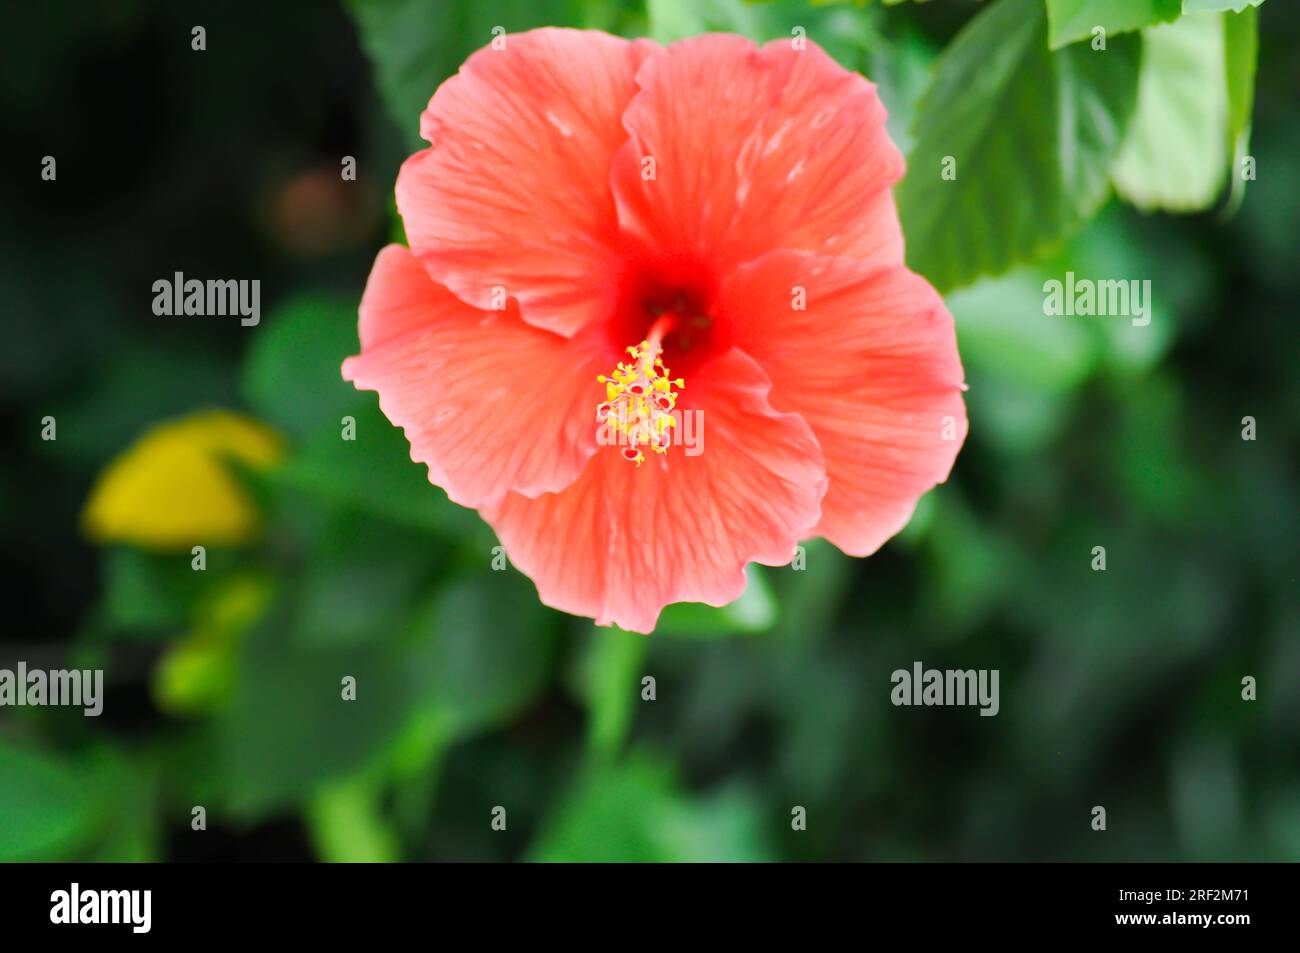 red hibiscus flower or Chinese rose or Hibiscus flower Stock Photo